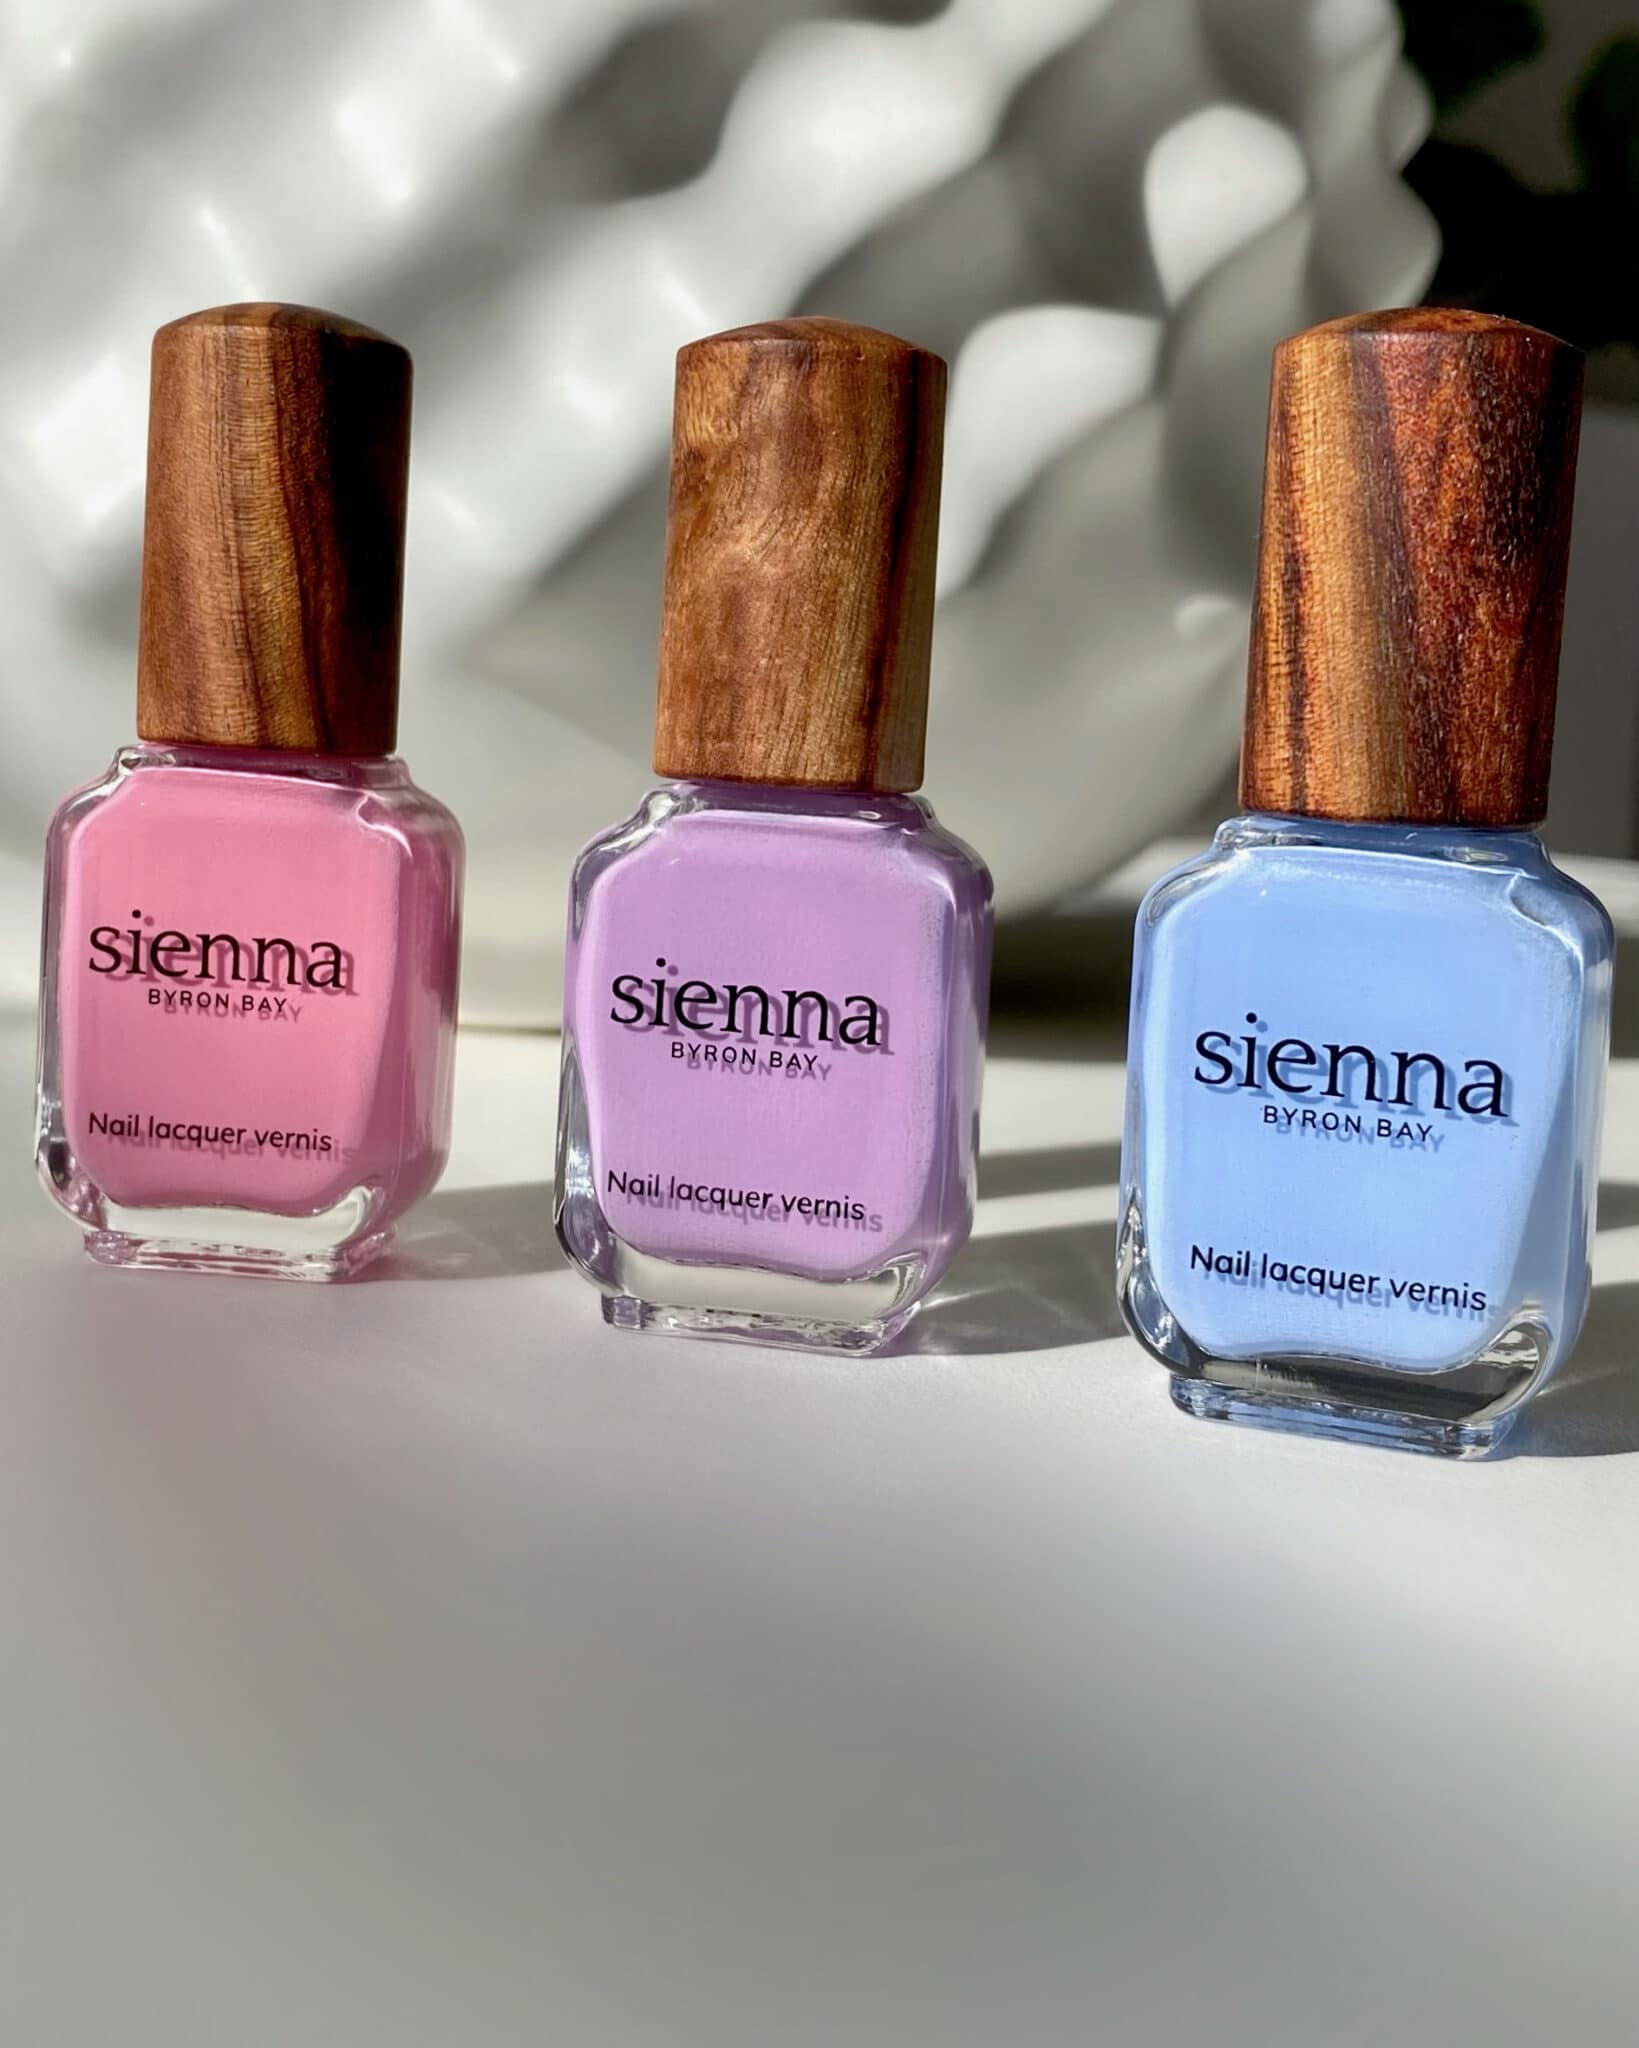 pink purple and blue nail polish bottles with timber cap by sienna